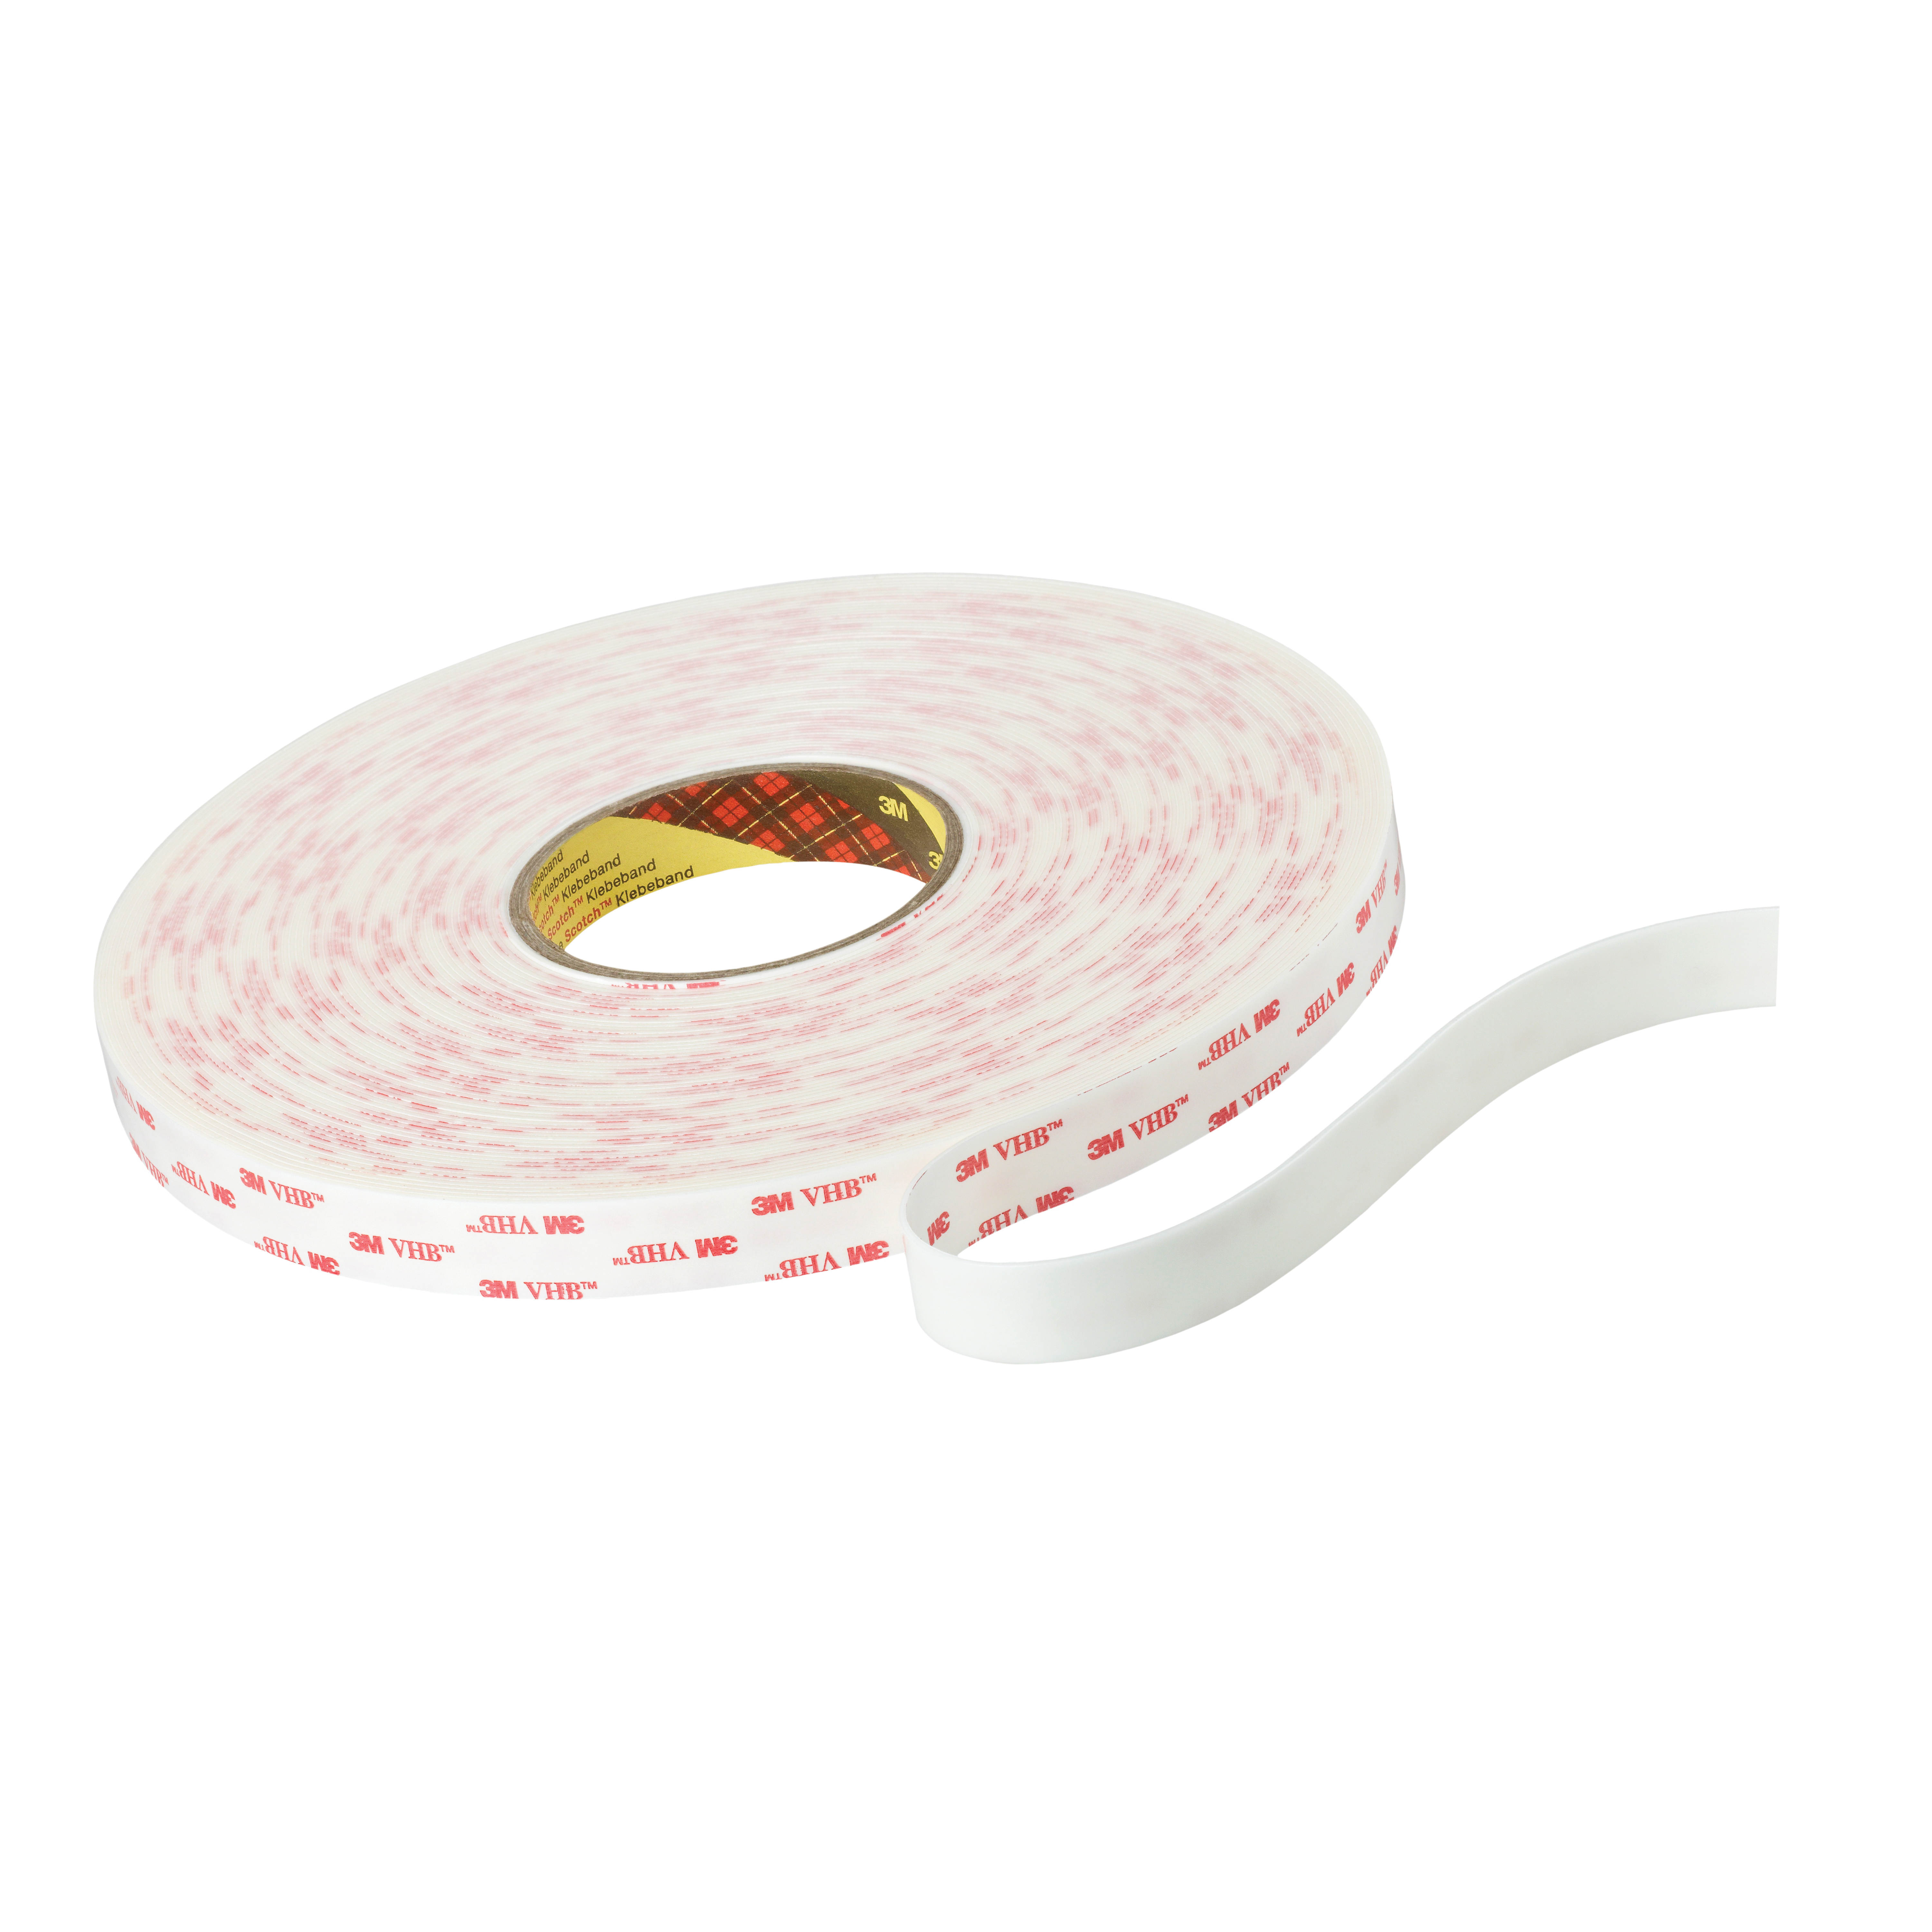 3M™ VHB™ 021200-87581 Pressure Sensitive Double Sided Bonding Tape, 72 yd L x 3/4 in W, 0.025 in THK, Low Surface Energy Acrylic Adhesive, Acrylic Foam Backing, White